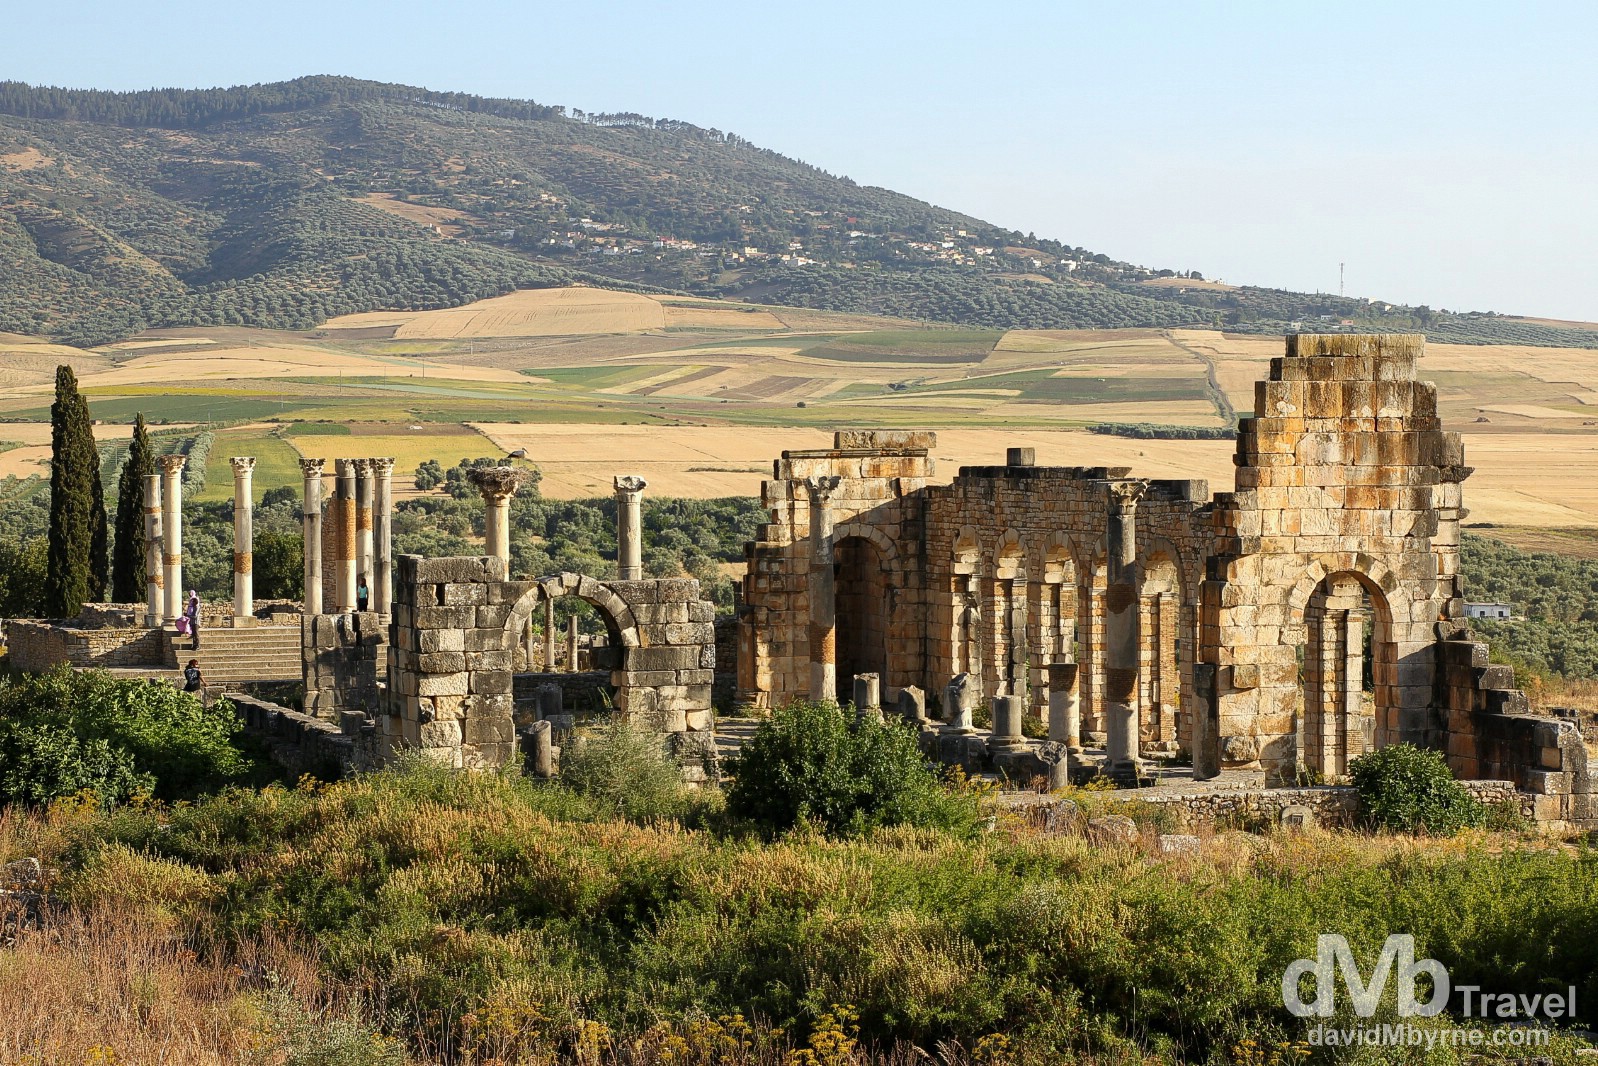 An overview of the Forum, Capital & Basilica of the UNESCO-listed Roman ruins of Volubilis, northern Morocco. May 25th, 2014.